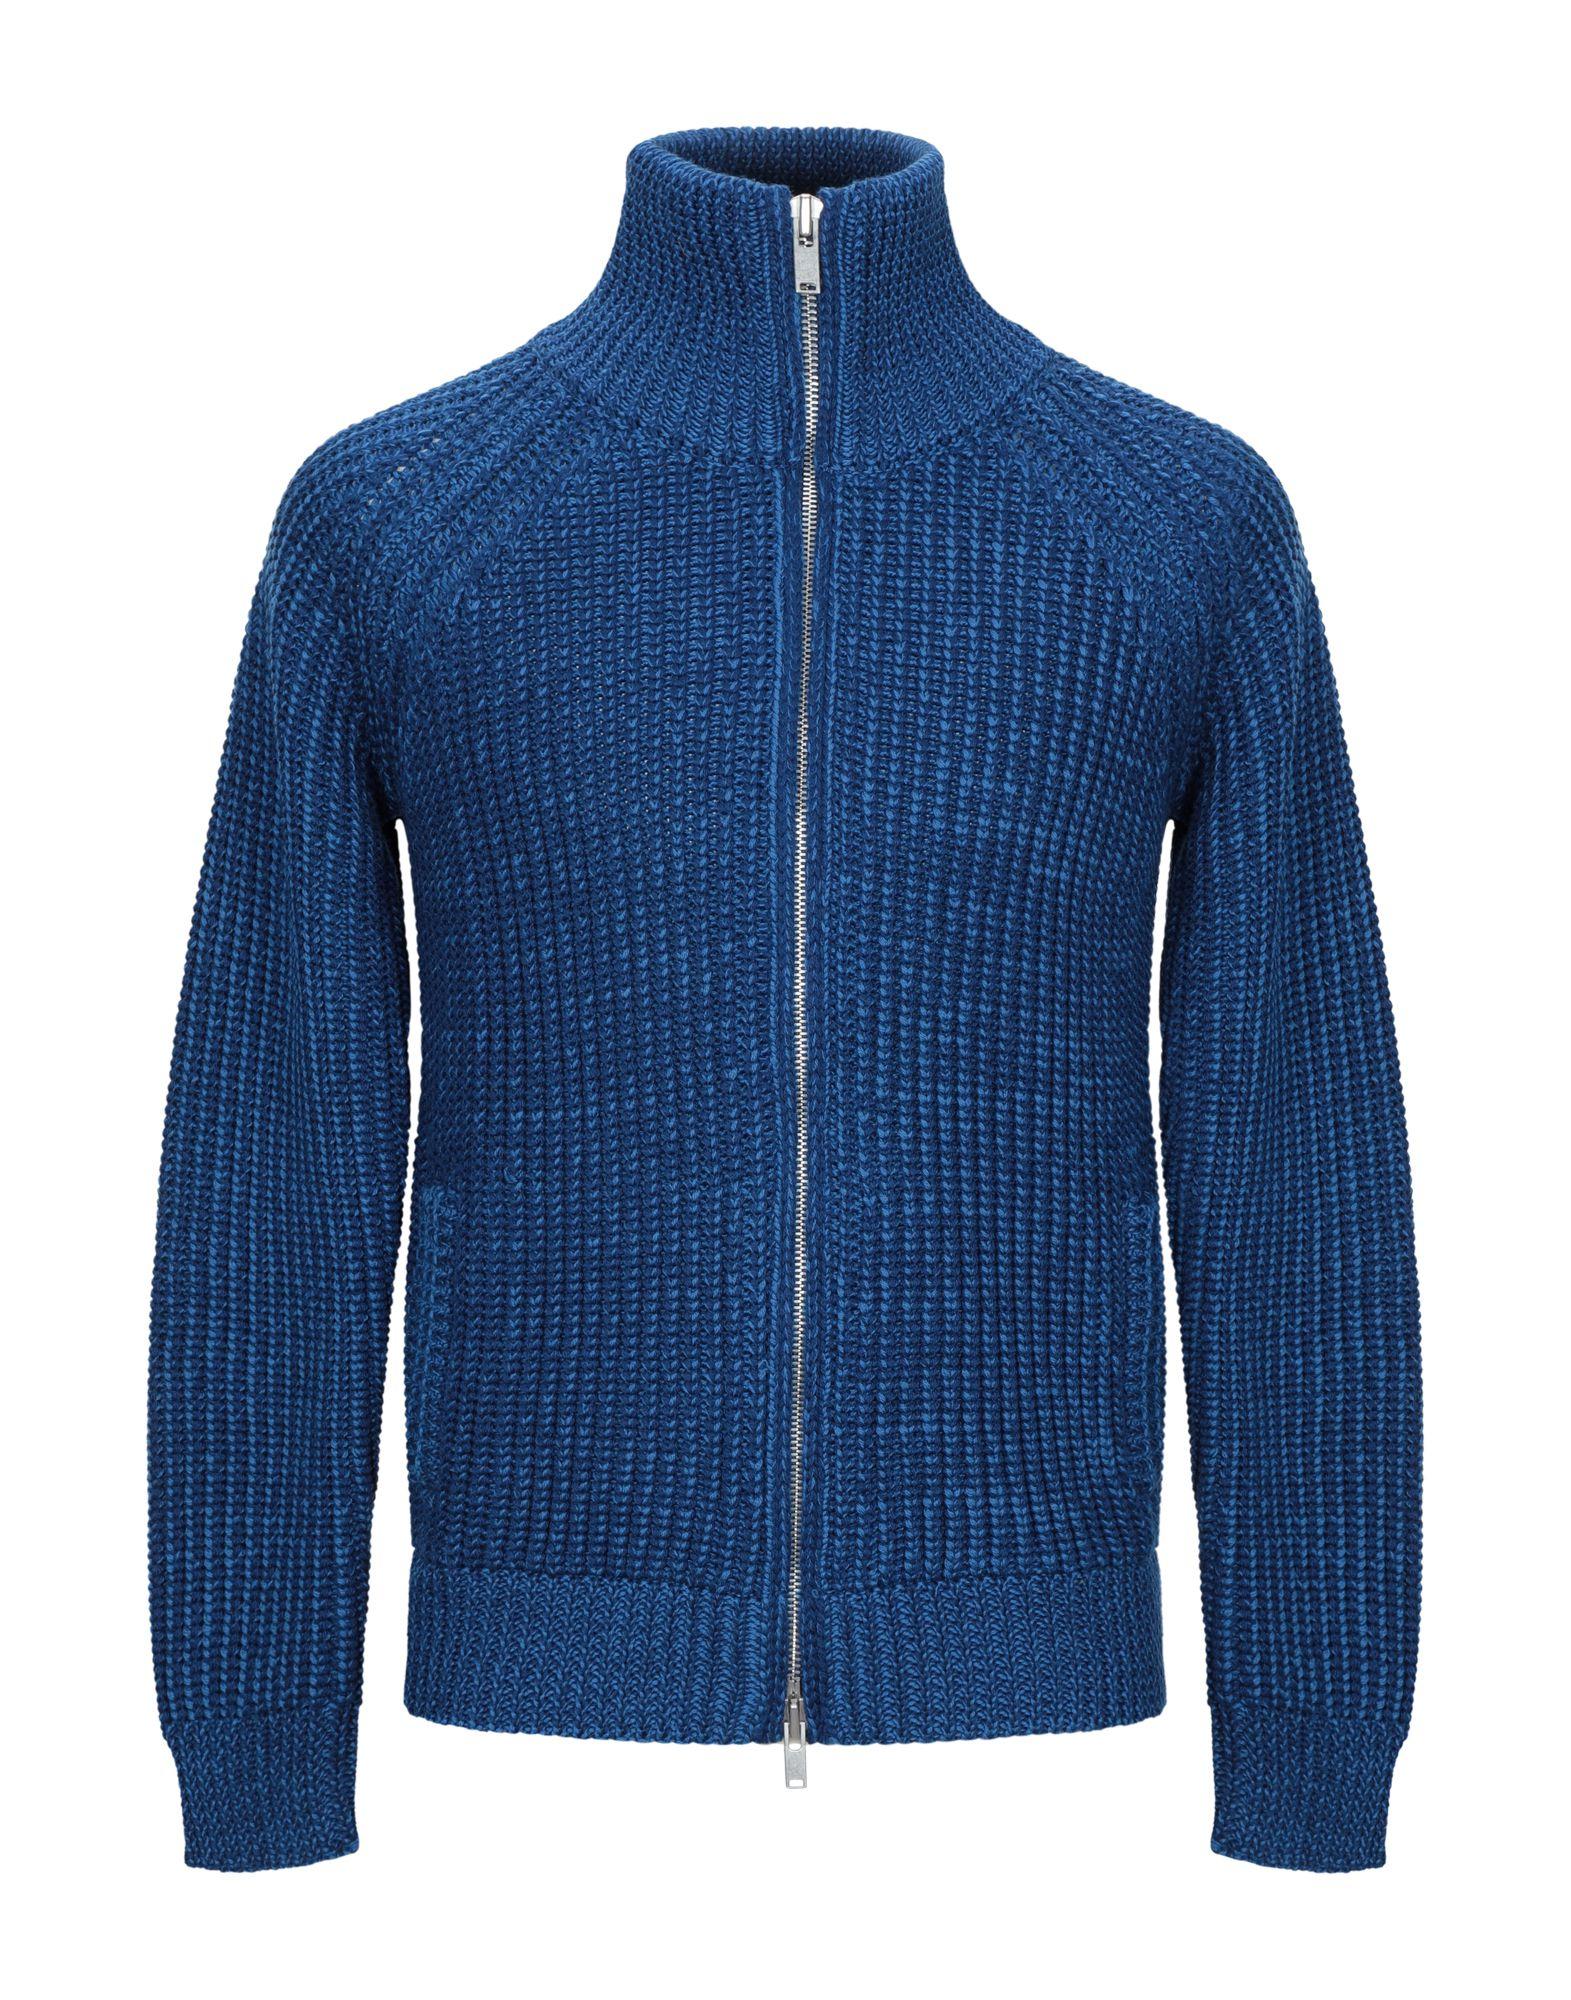 Roberto Collina Wool Cardigan in Bright Blue (Blue) for Men - Lyst